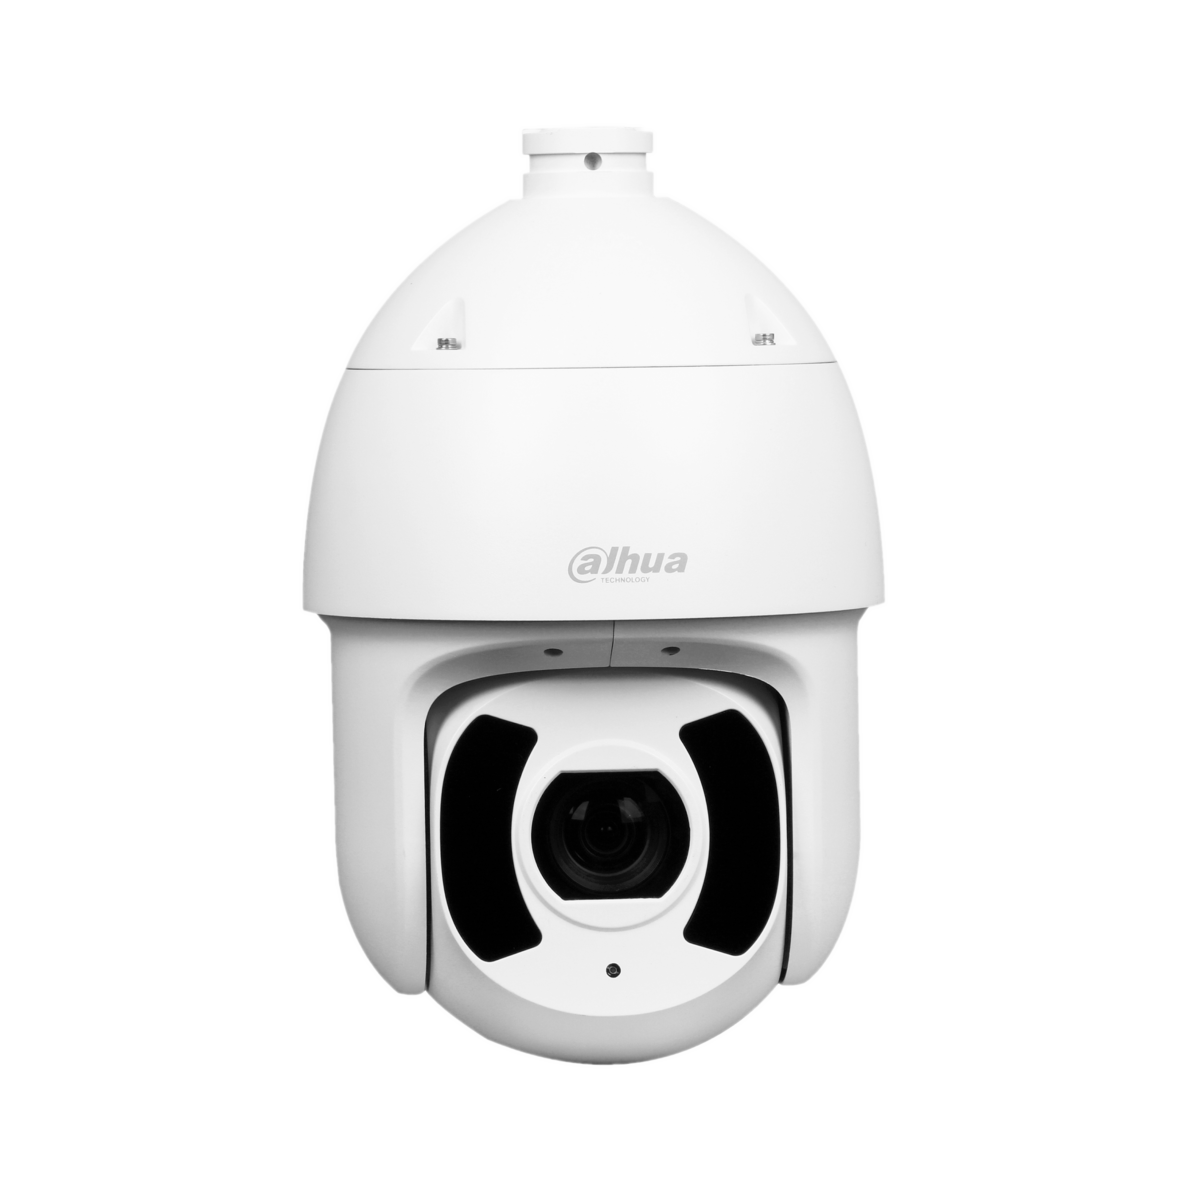 WIZSENSE SERIES IP CAMERA WHITE AI AUTO TRACKING 4MP H.264/4+/5/5+ SPEED DOME PTZ 120 WDR METAL 3.95-177.7MMMOTORISED LENS 45X ZOOM STARLIGHT IR 250M POE+ IP67 WITHOUT MIC AUDIO IN AUDIO OUT 7 x ALARM IN 2 x ALARM OUT SUPPORT UP TO 512GB SDIK10 24VDC